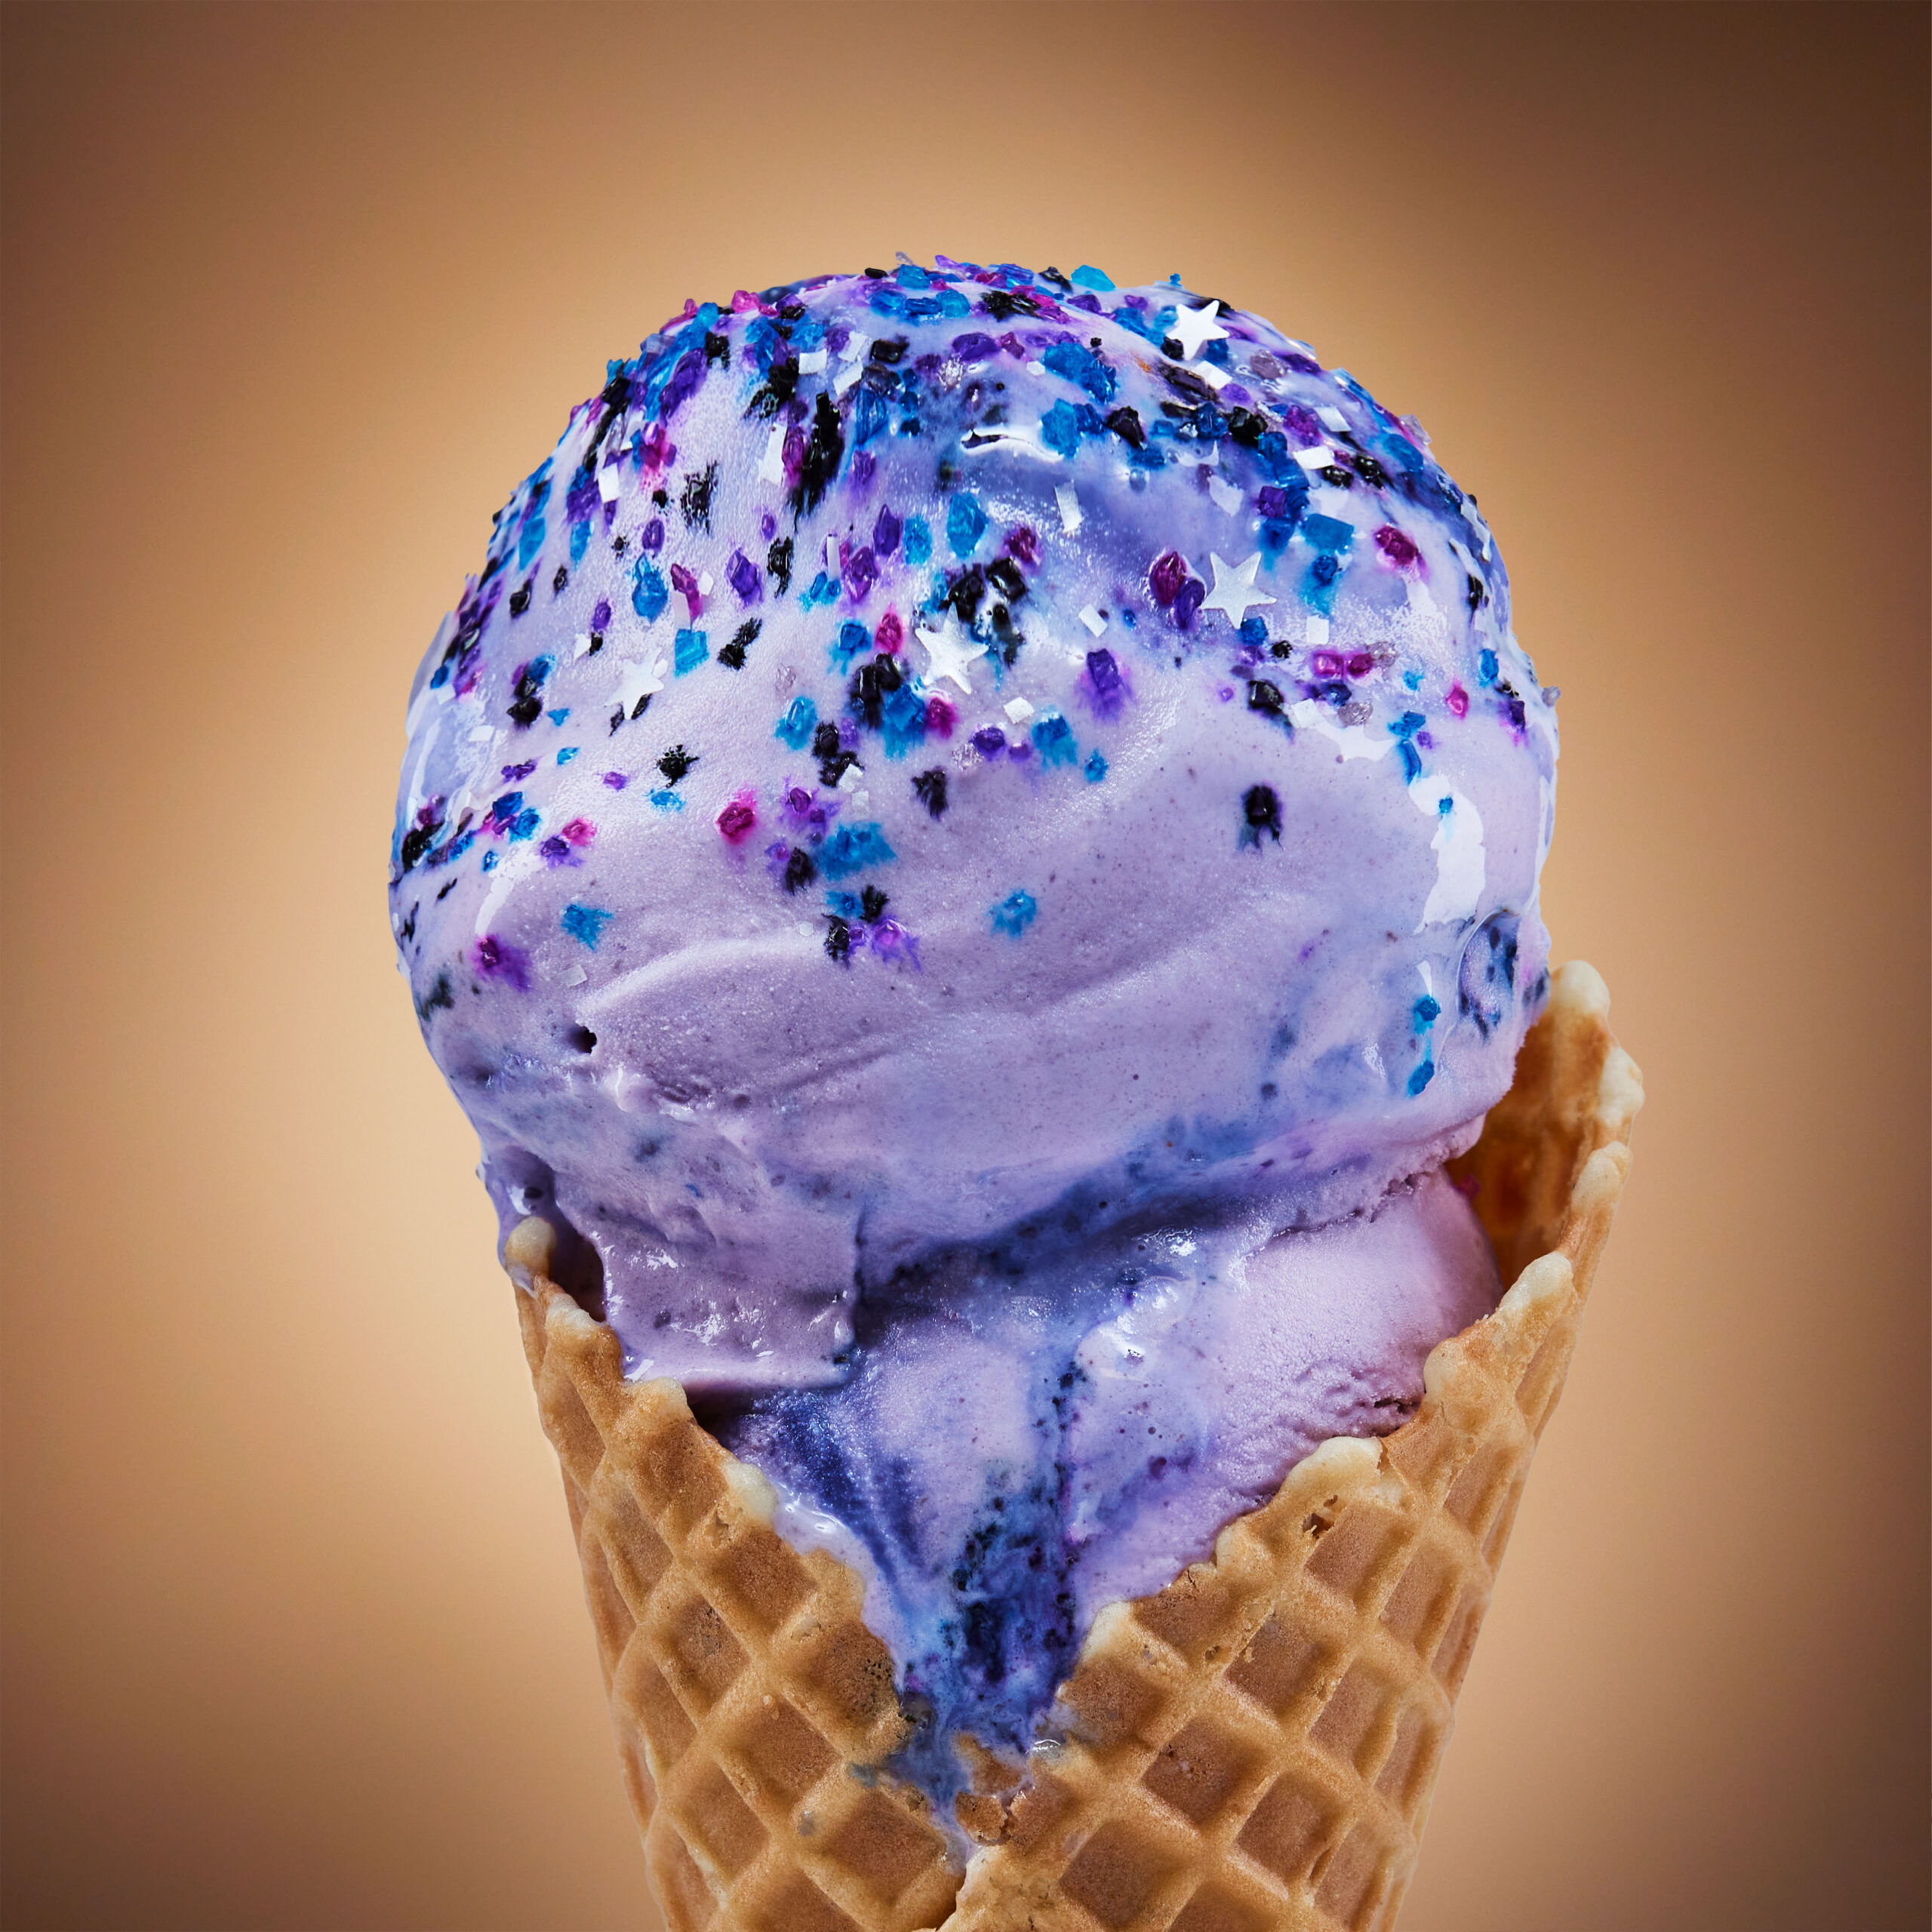 A double scoop of purple ice cream with silver black magenta and blue star sprinkles on a waffle cone